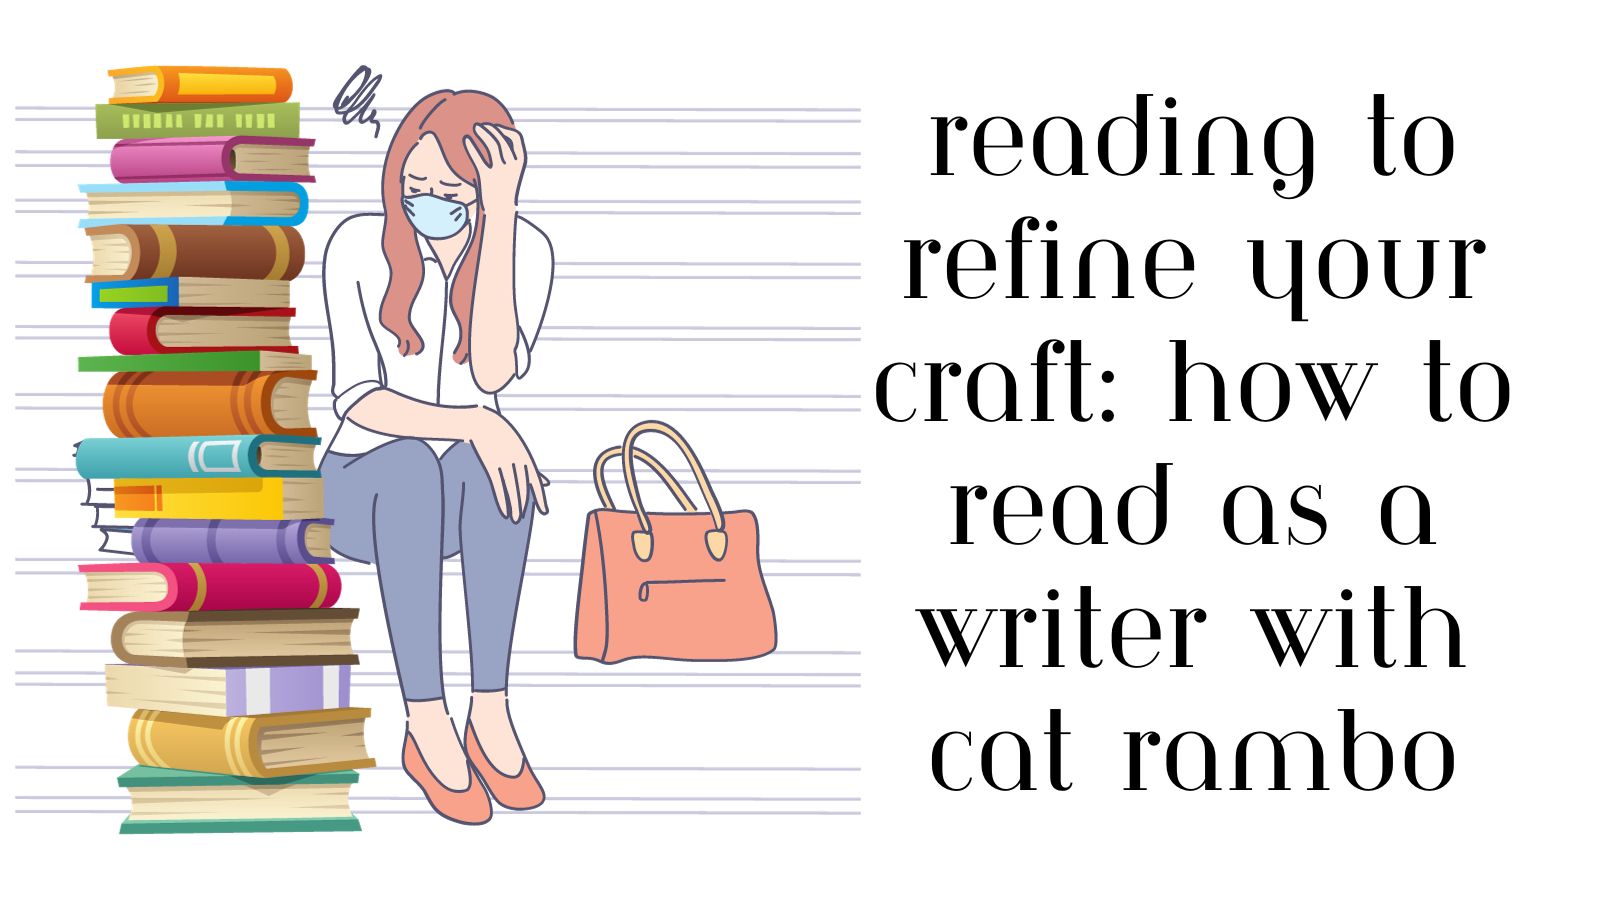 Reading to Refine Your Craft: How to Read as a Writer with Cat Rambo